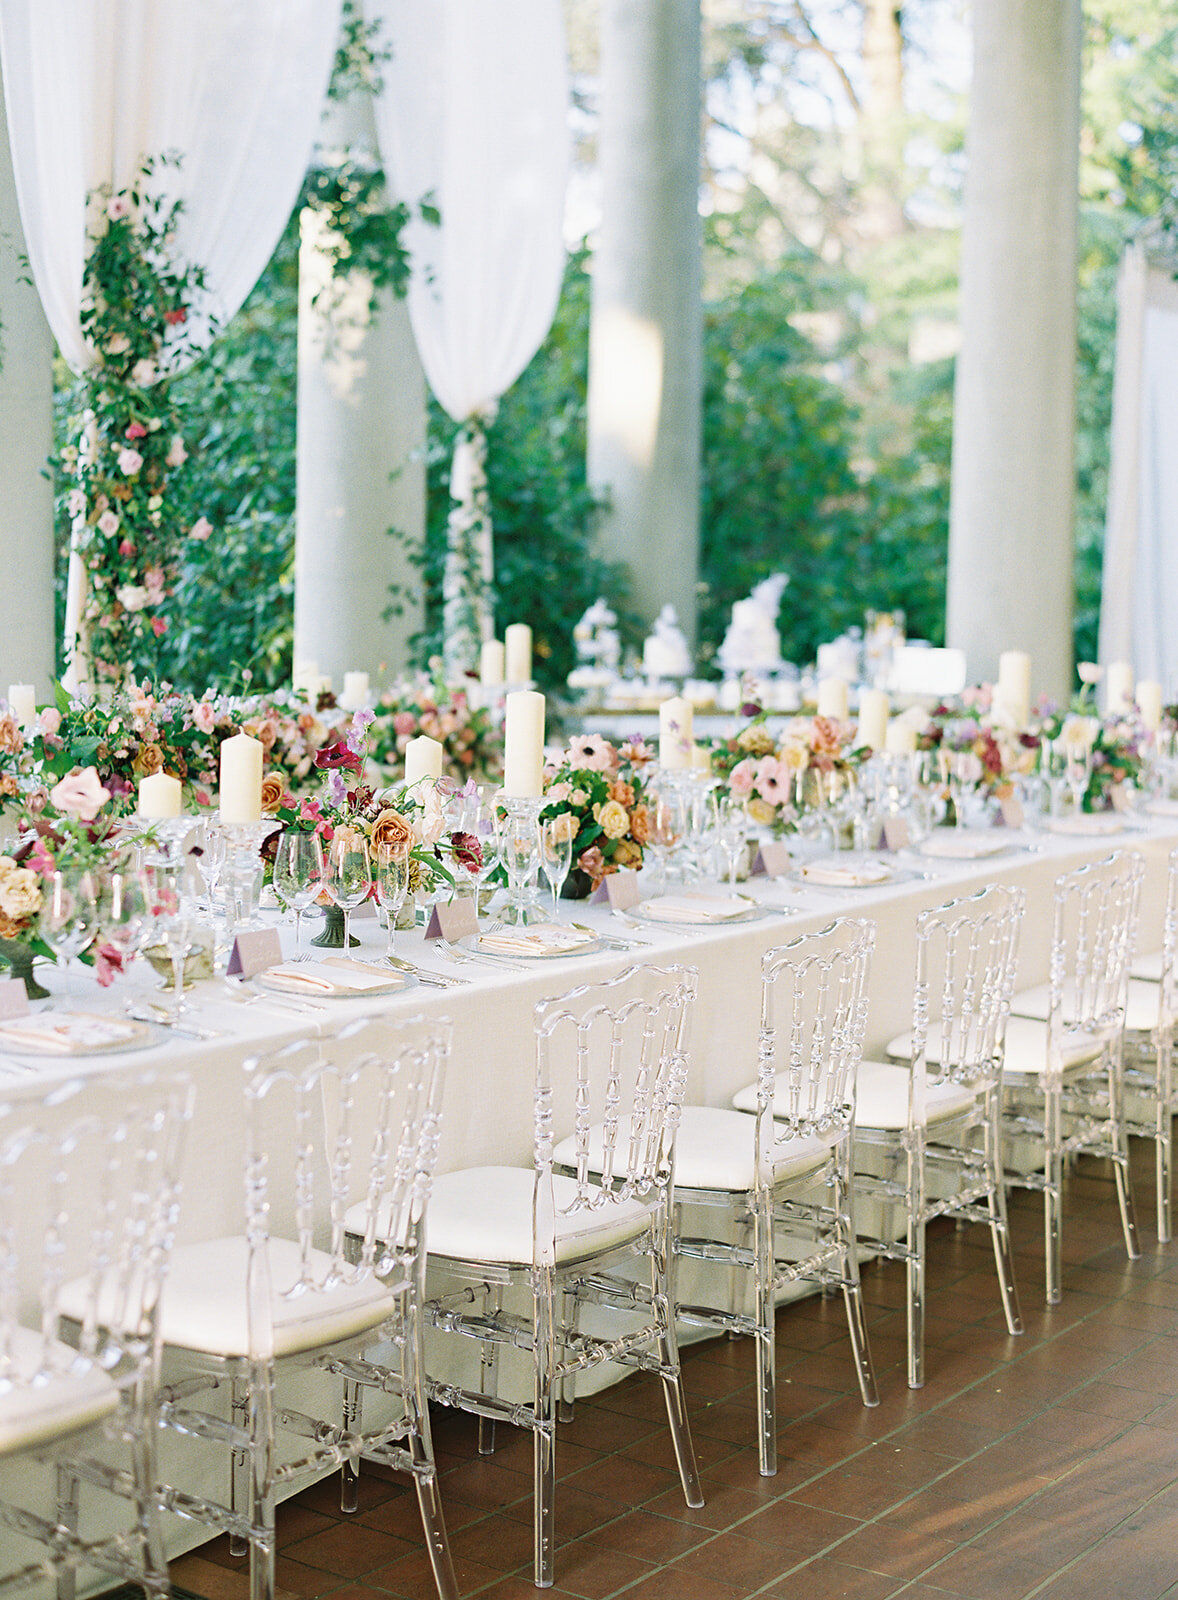 reception chairs at long decorated table